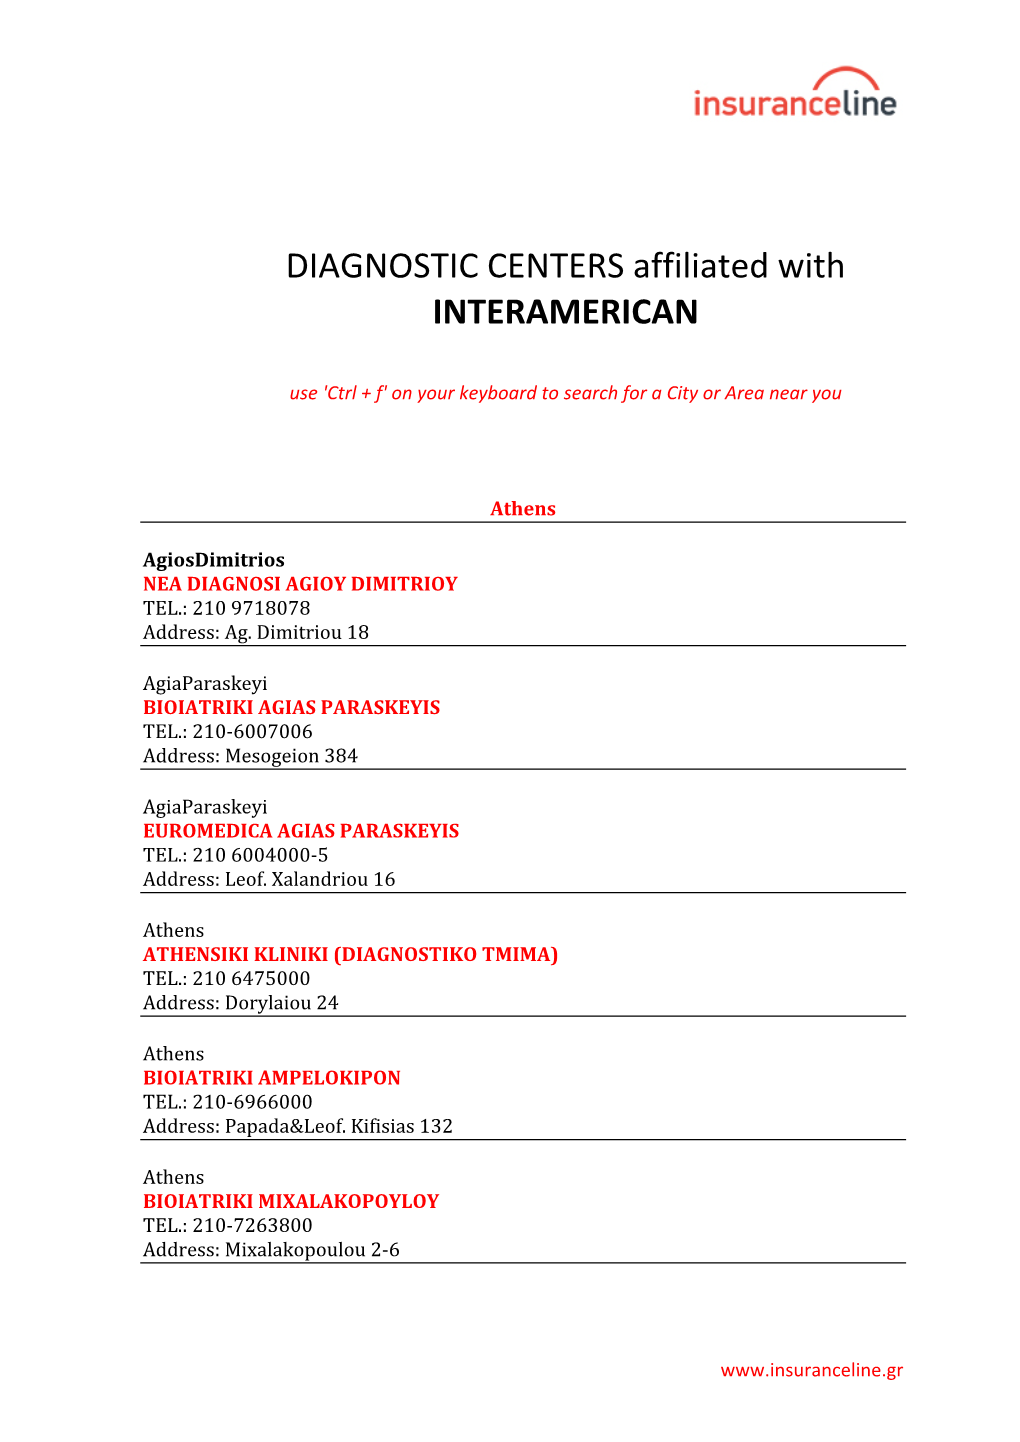 DIAGNOSTIC CENTERS Affiliated with INTERAMERICAN